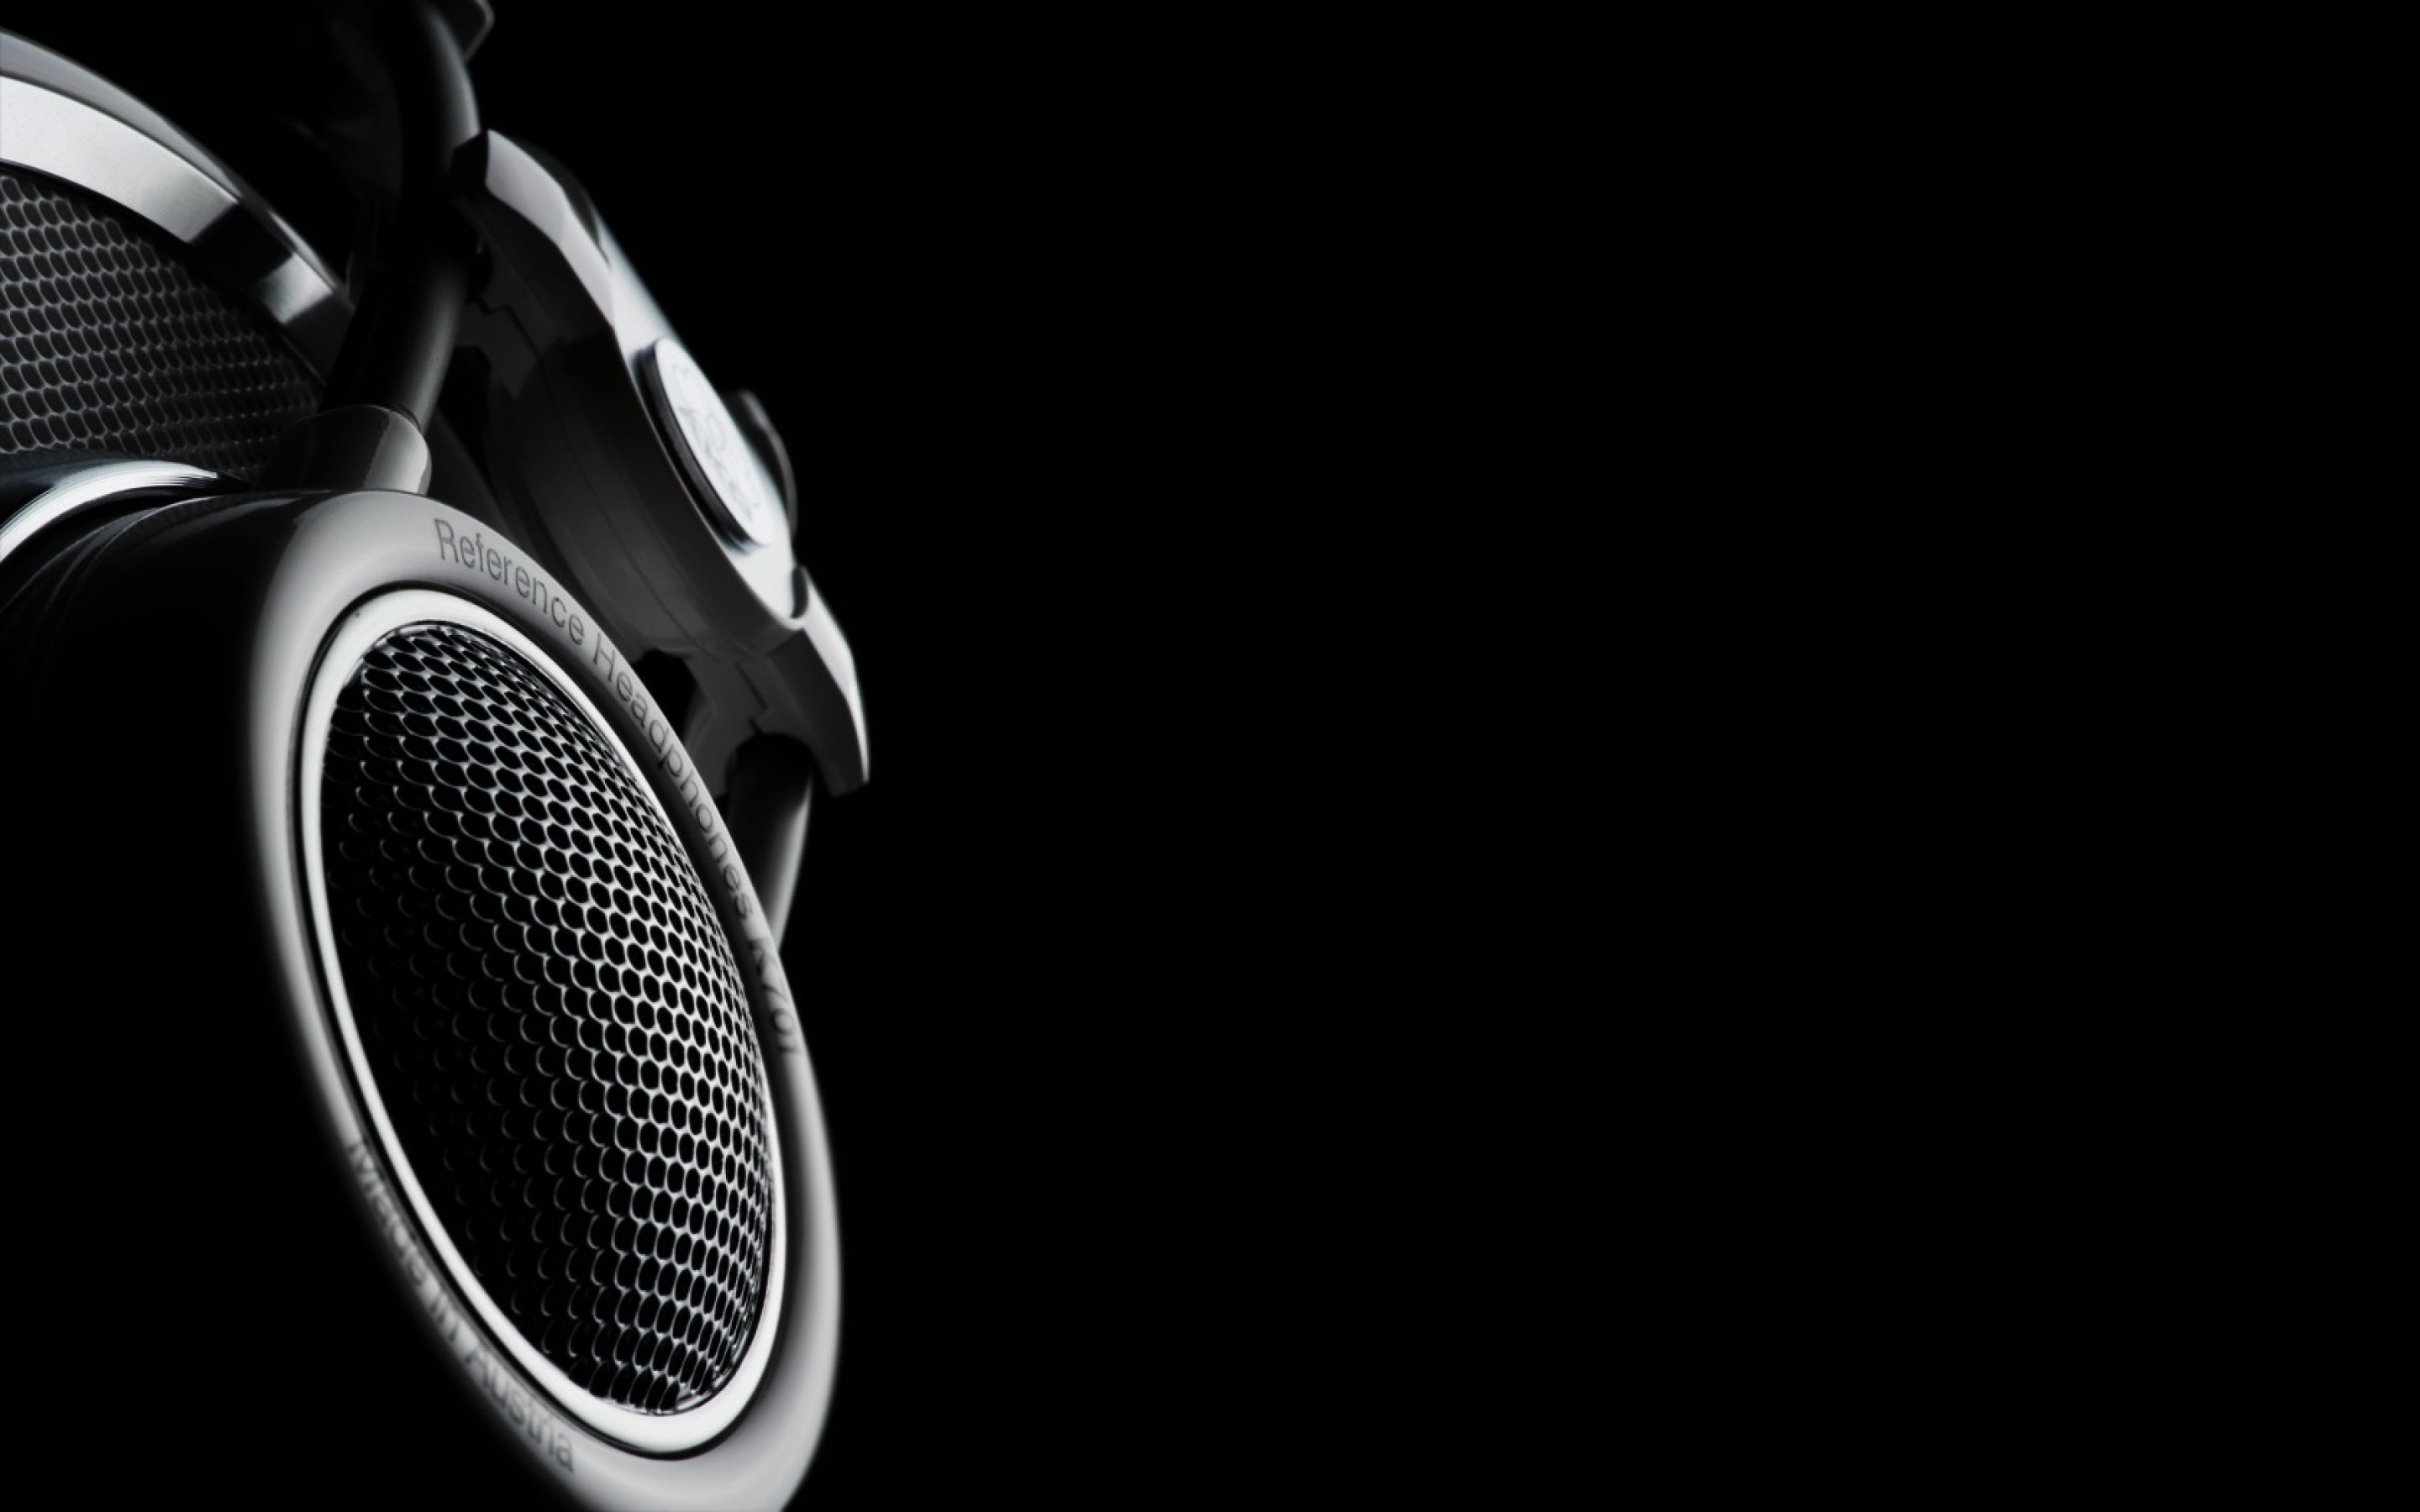 Reference headphones close up 1680x1050 2880x1800 - Wallpaper - HD ...